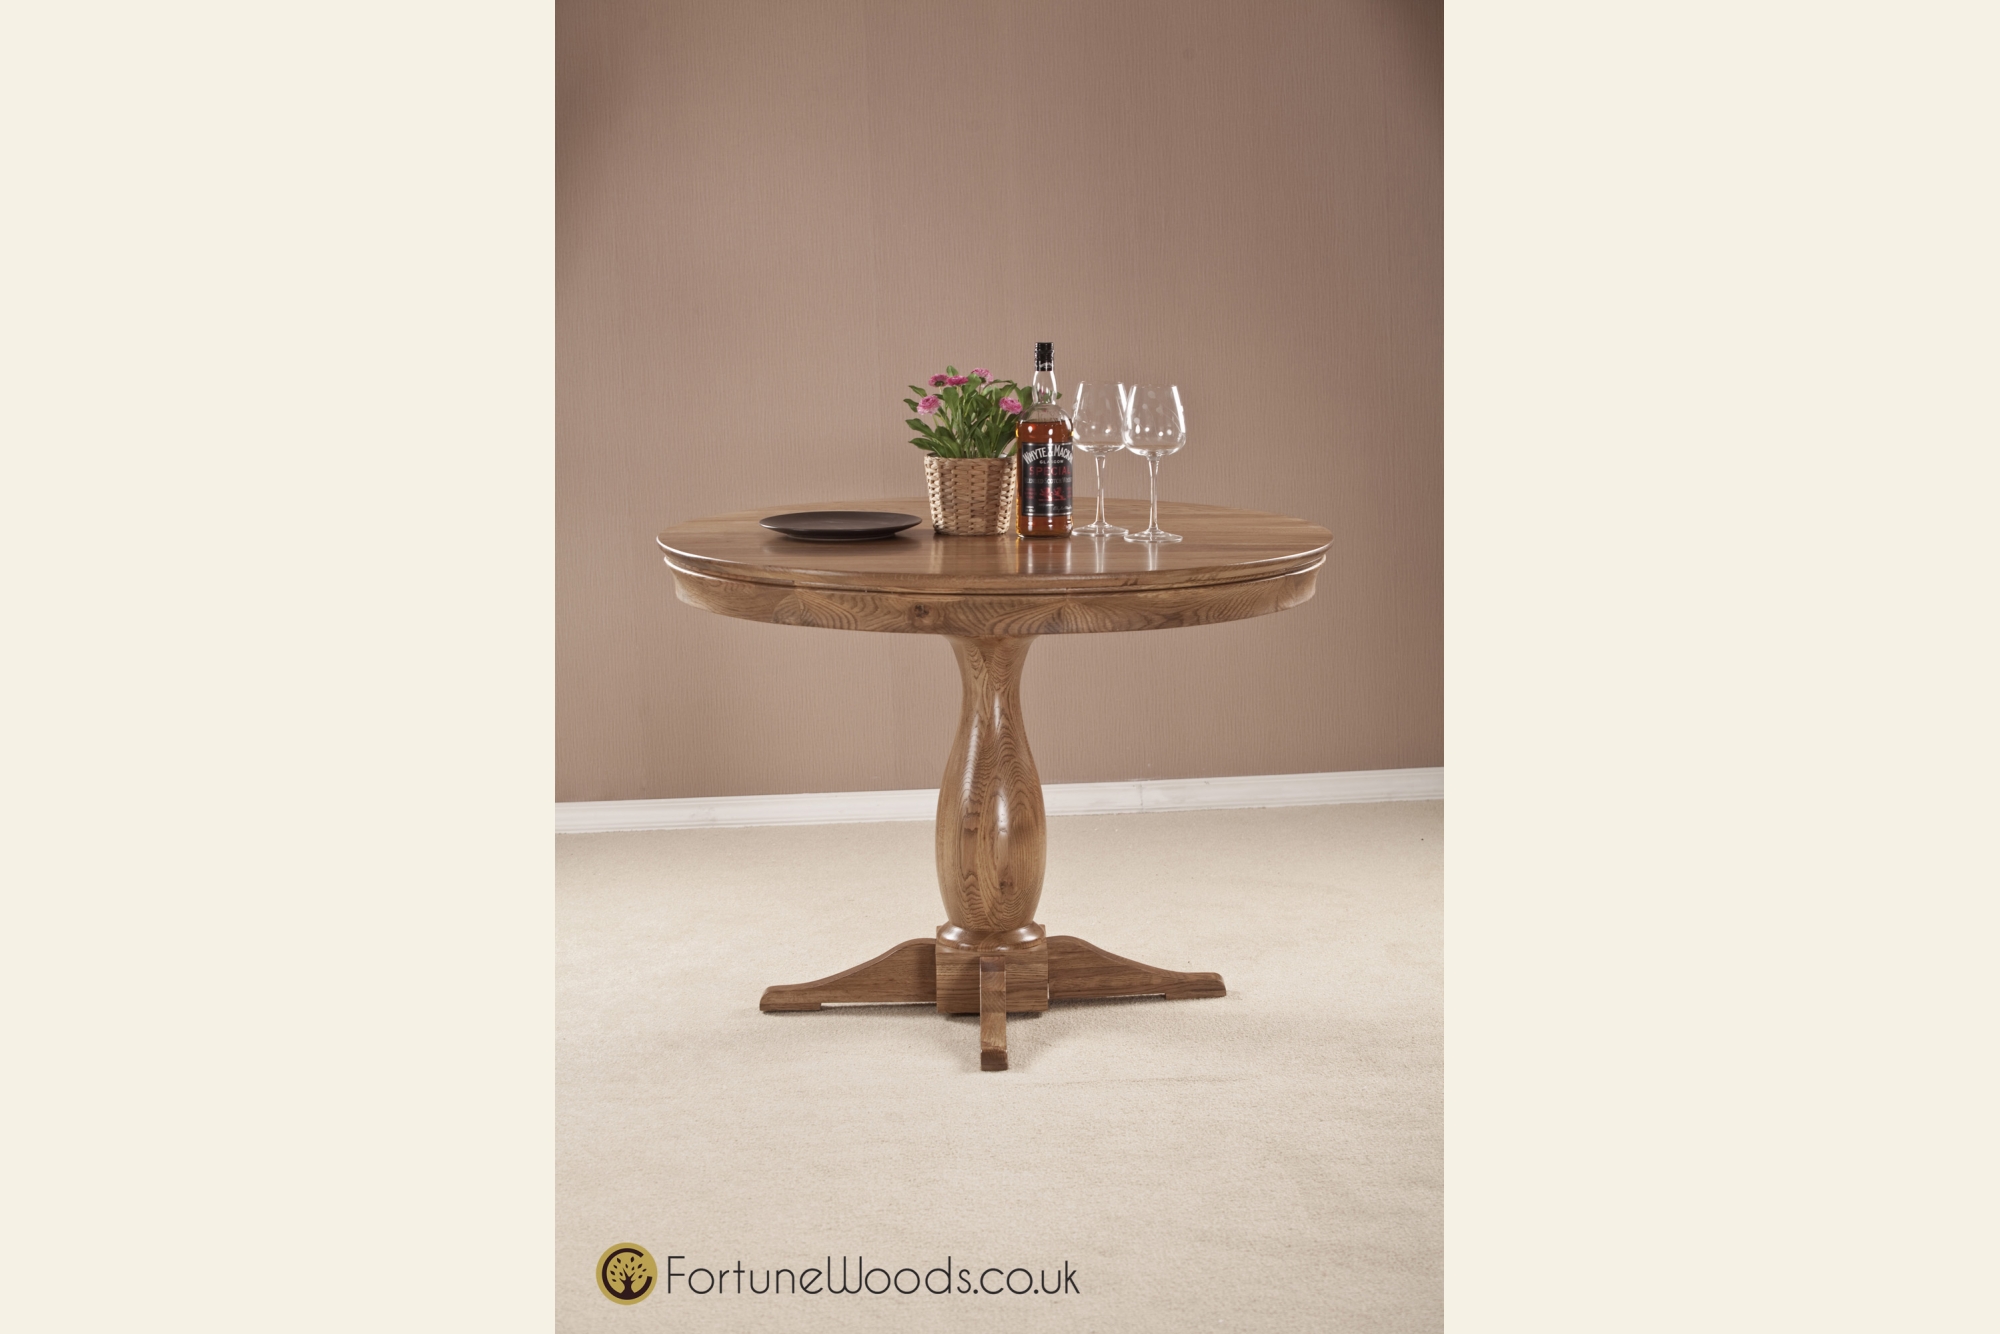 Fortune Woods Bordeaux Round Dining Table